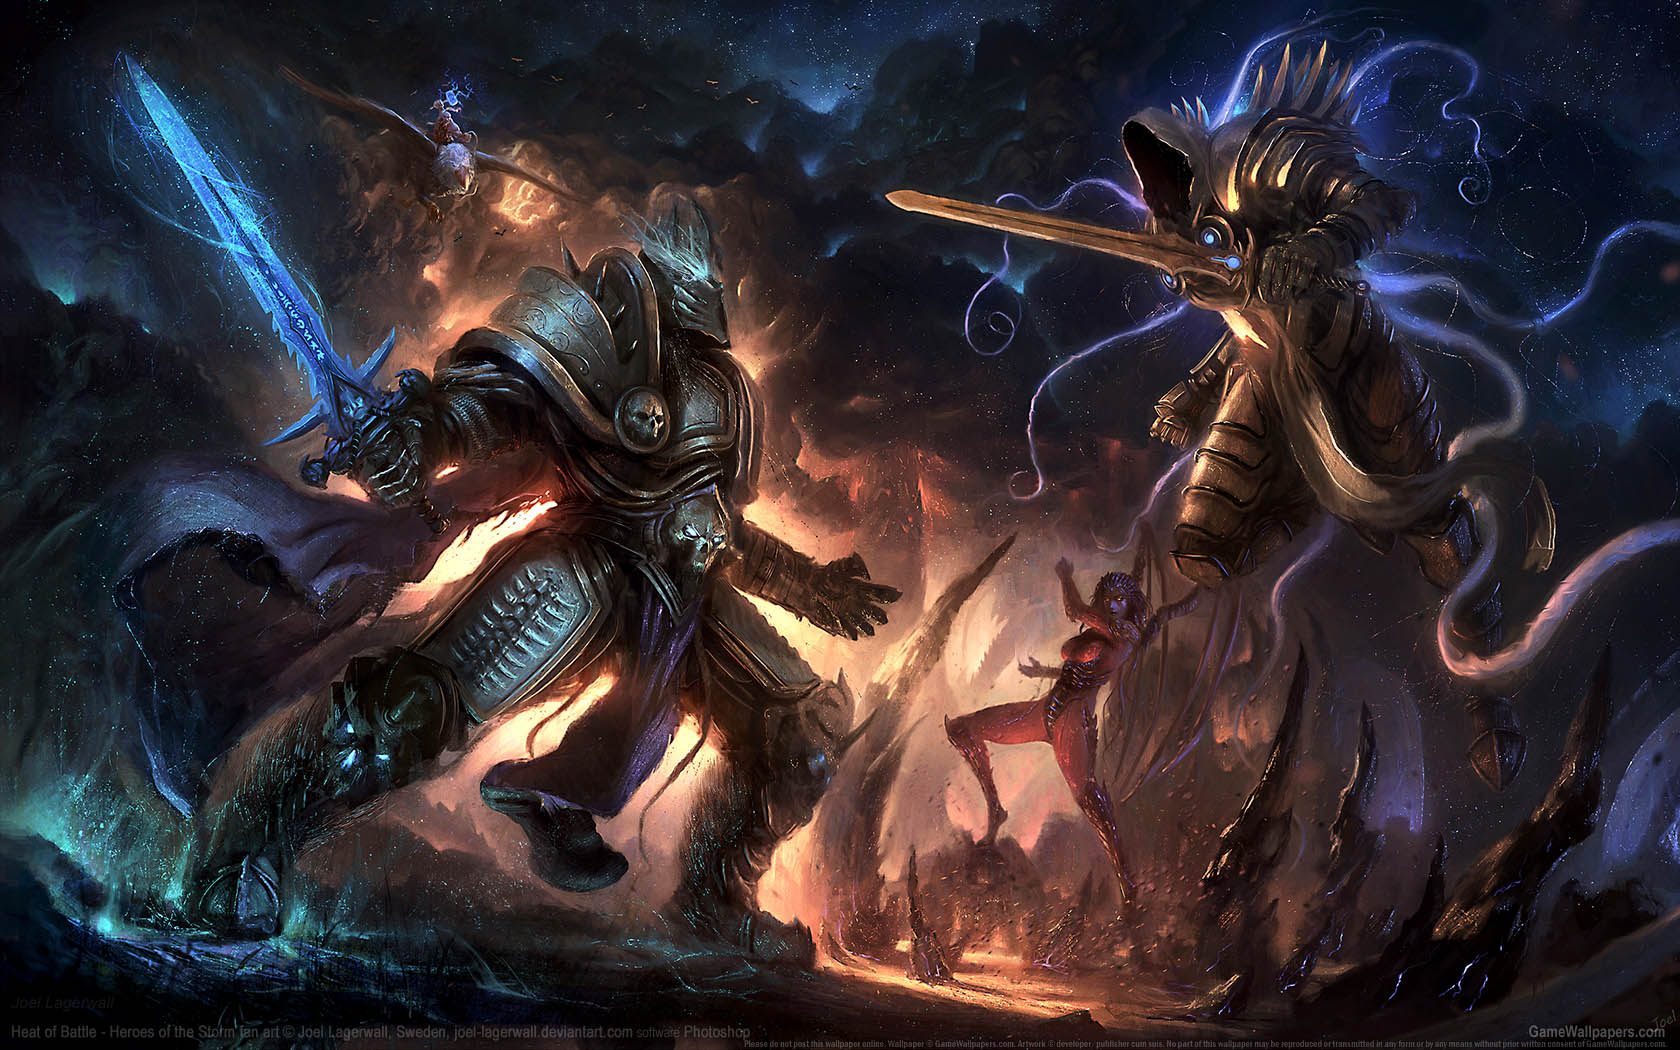 Heroes of the Storm fan art achtergrond 07 1680x1050